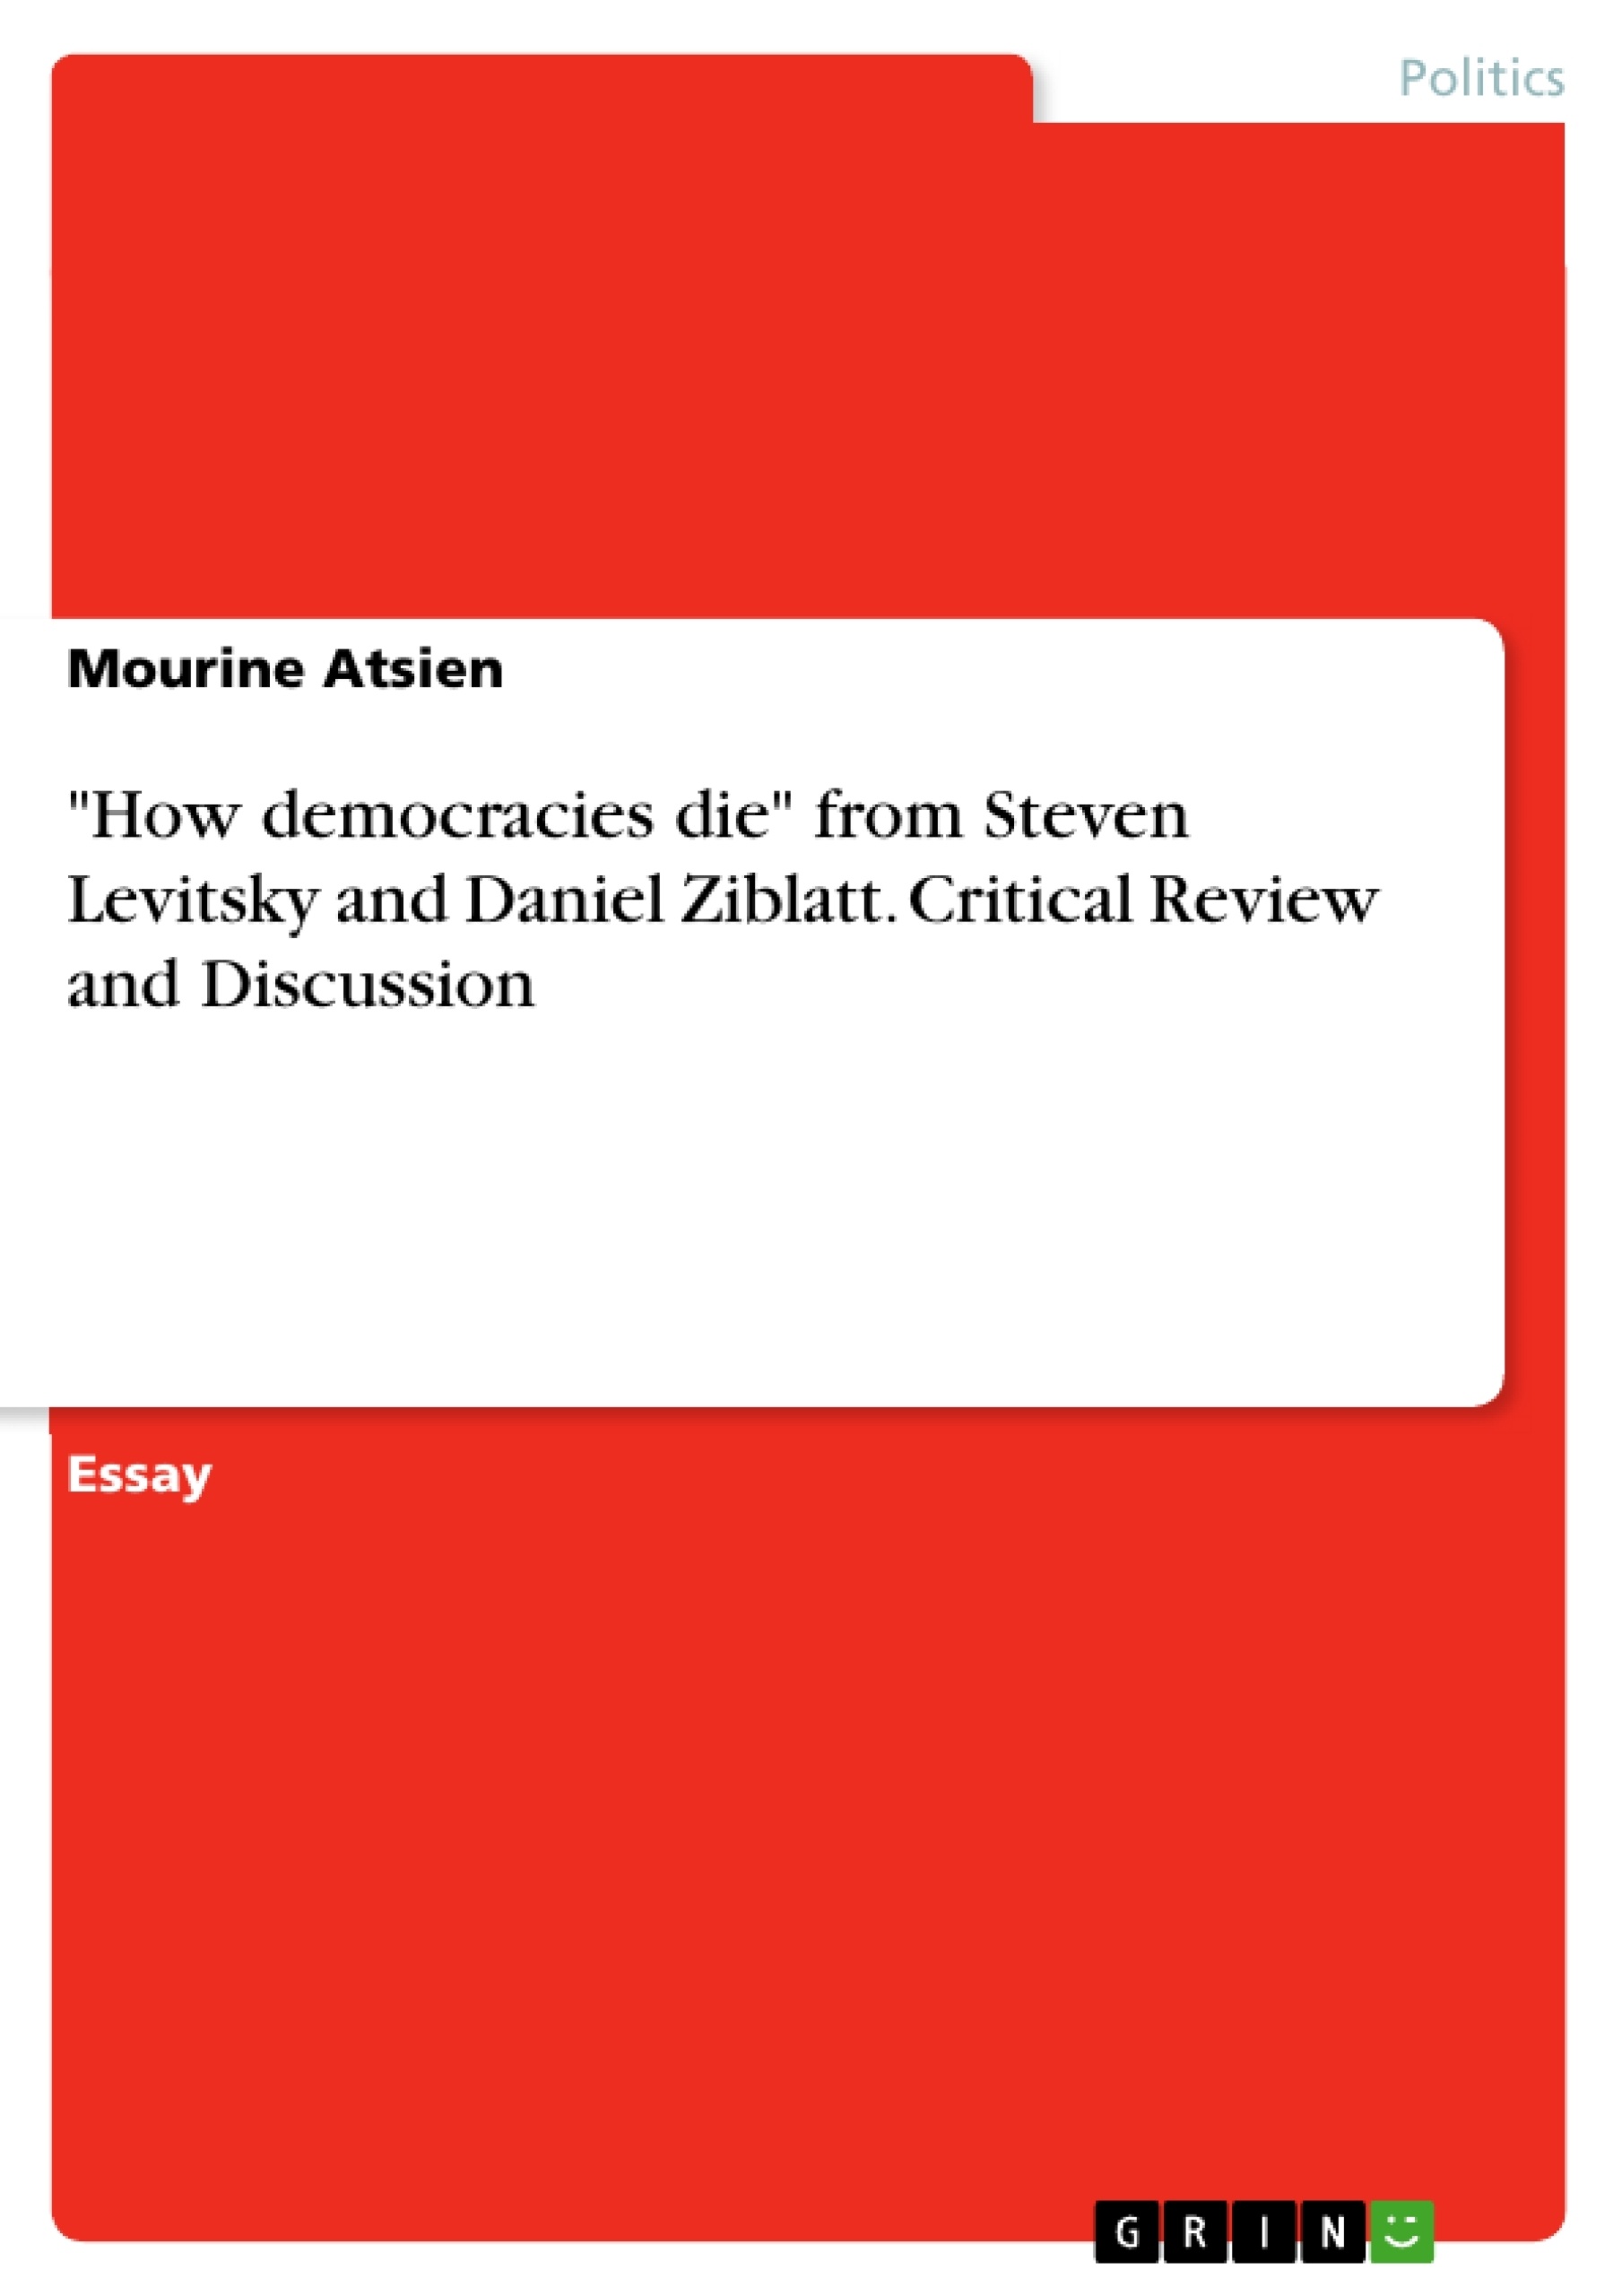 Title: "How democracies die" from Steven Levitsky and Daniel Ziblatt. Critical Review and Discussion